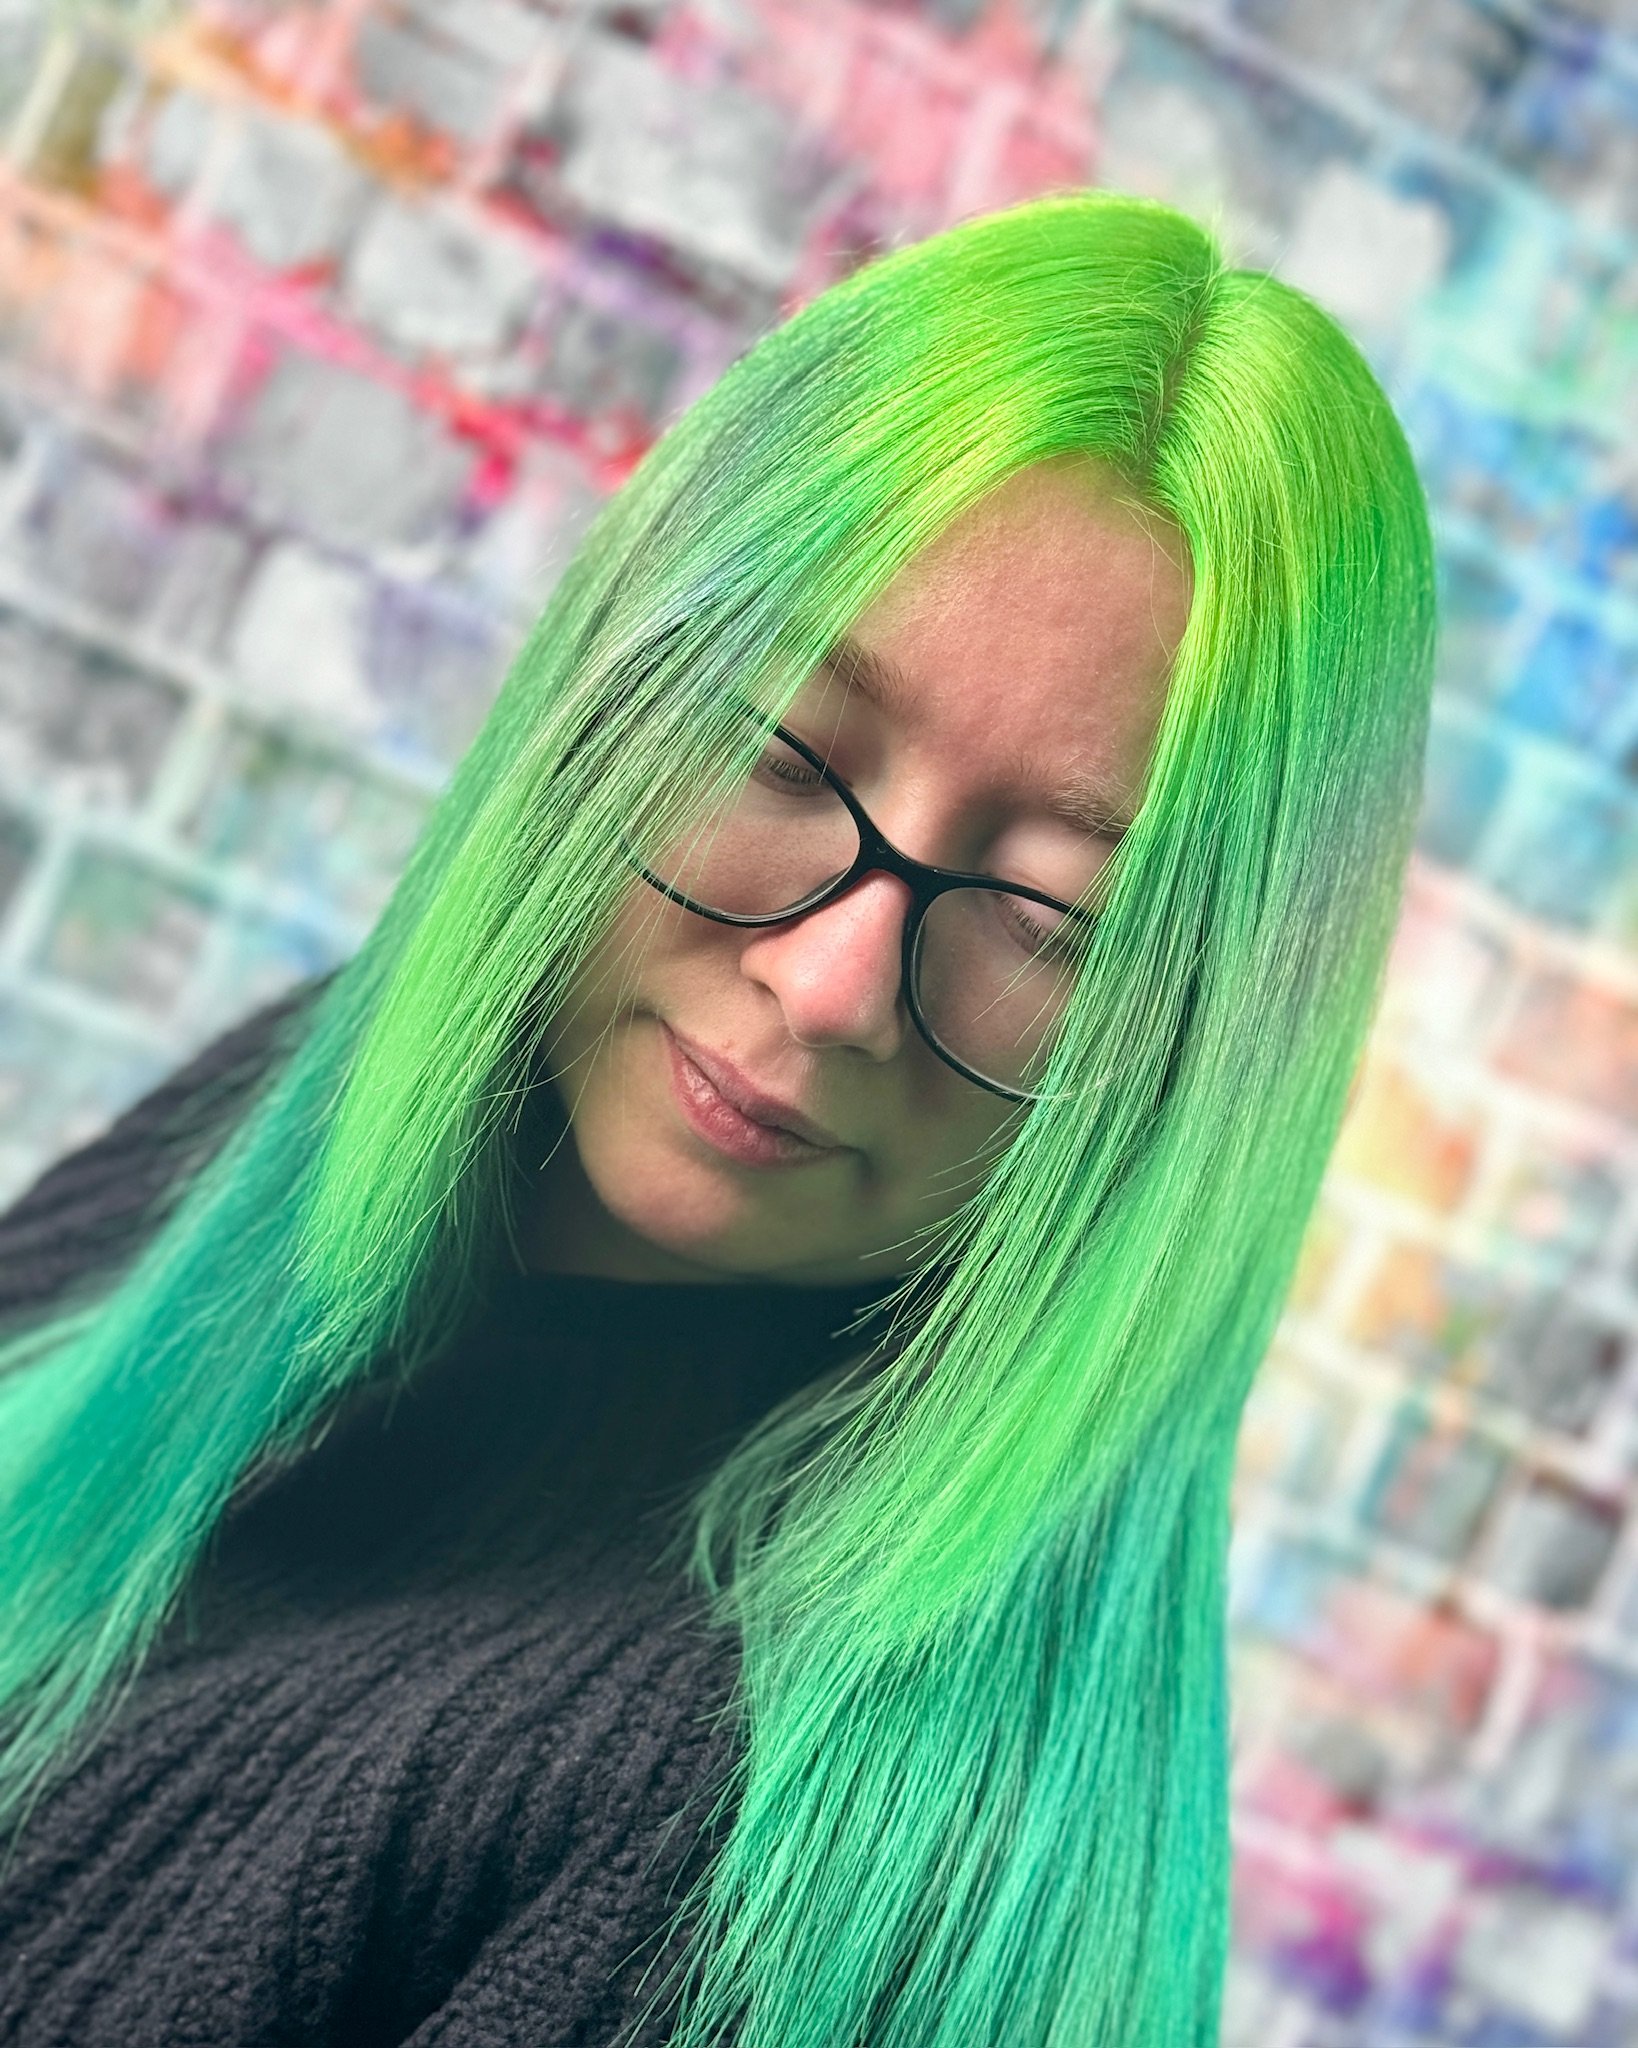 🔦💚Spotlight on Becca 💚🔦

✨Have no fear, my friends! Becca &amp; Ed are still our dynamic duo of colour creativity, but we reckon it's Becca's turn to have her own little square!

✨Shall we cast our votes for Becca's next colour escapade?

✨Tell u